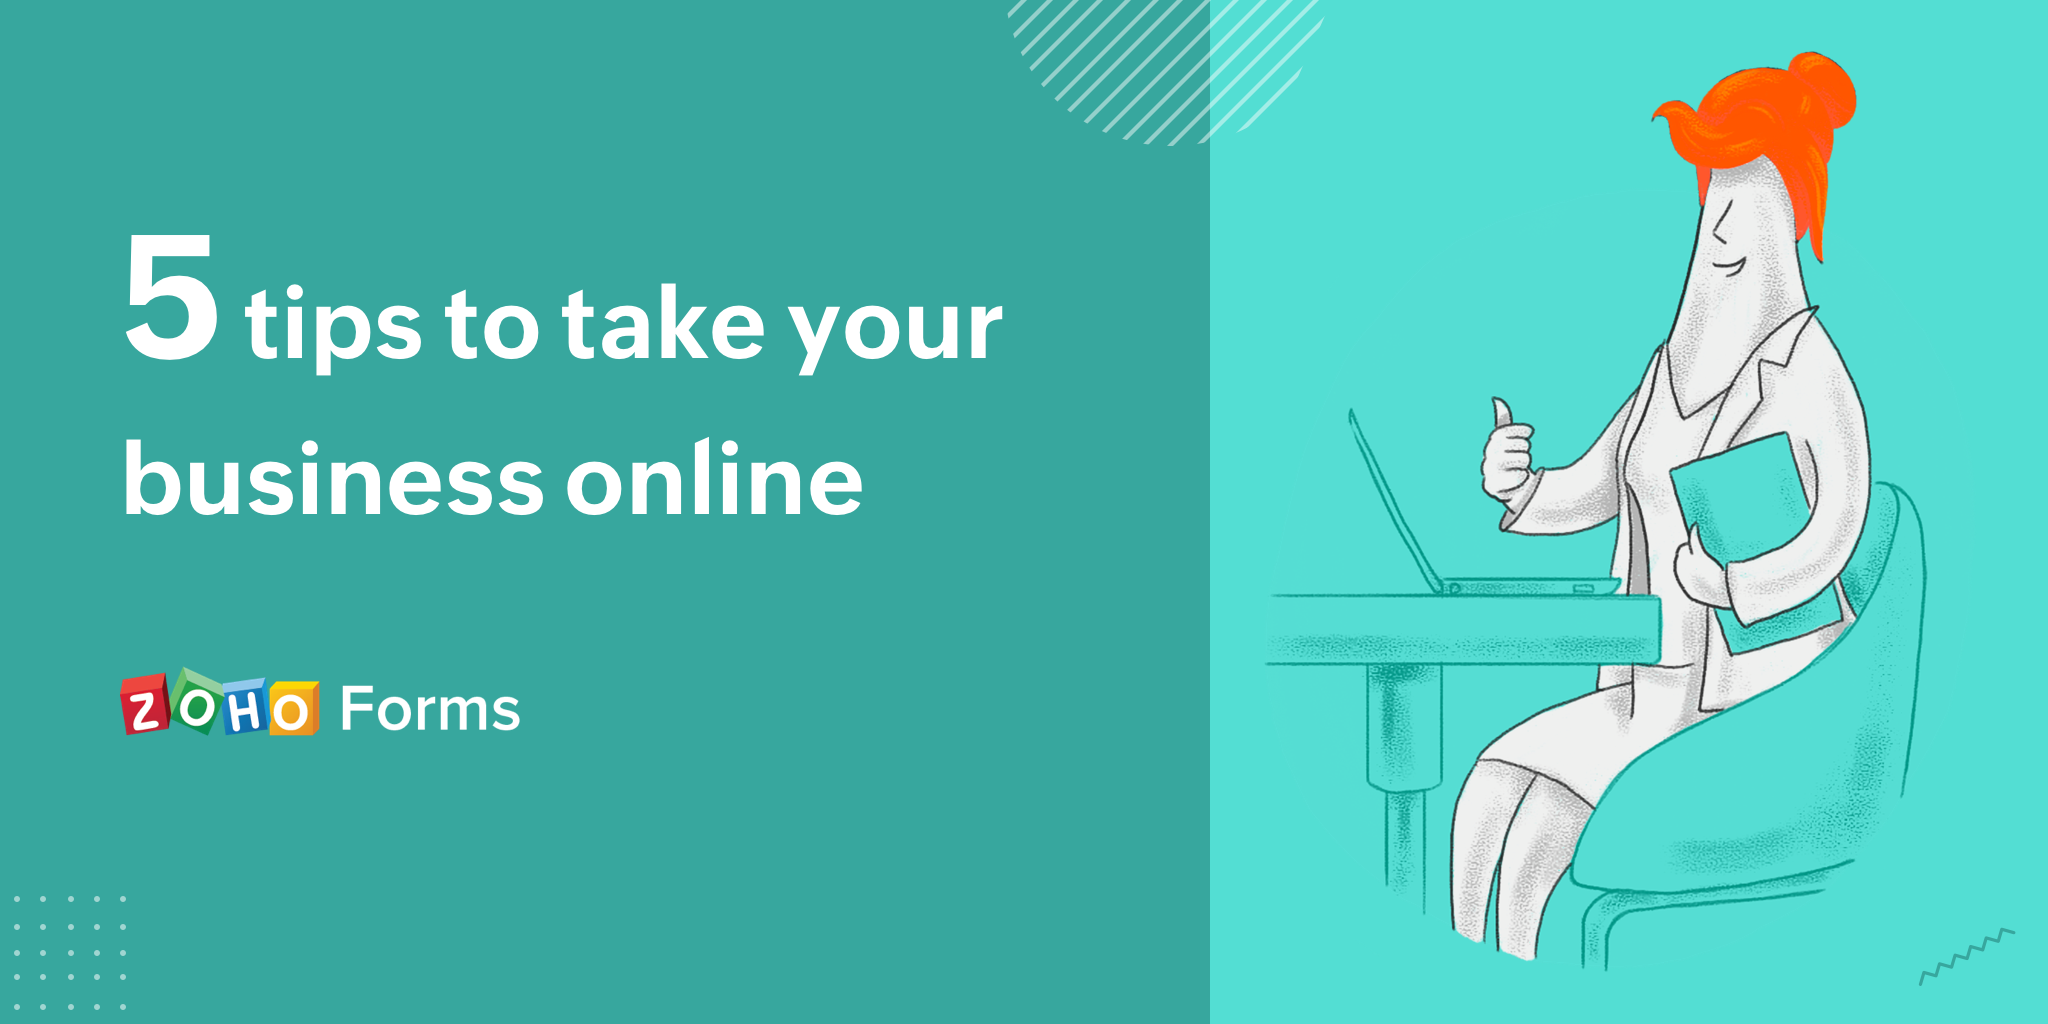 5 tips to take your business online